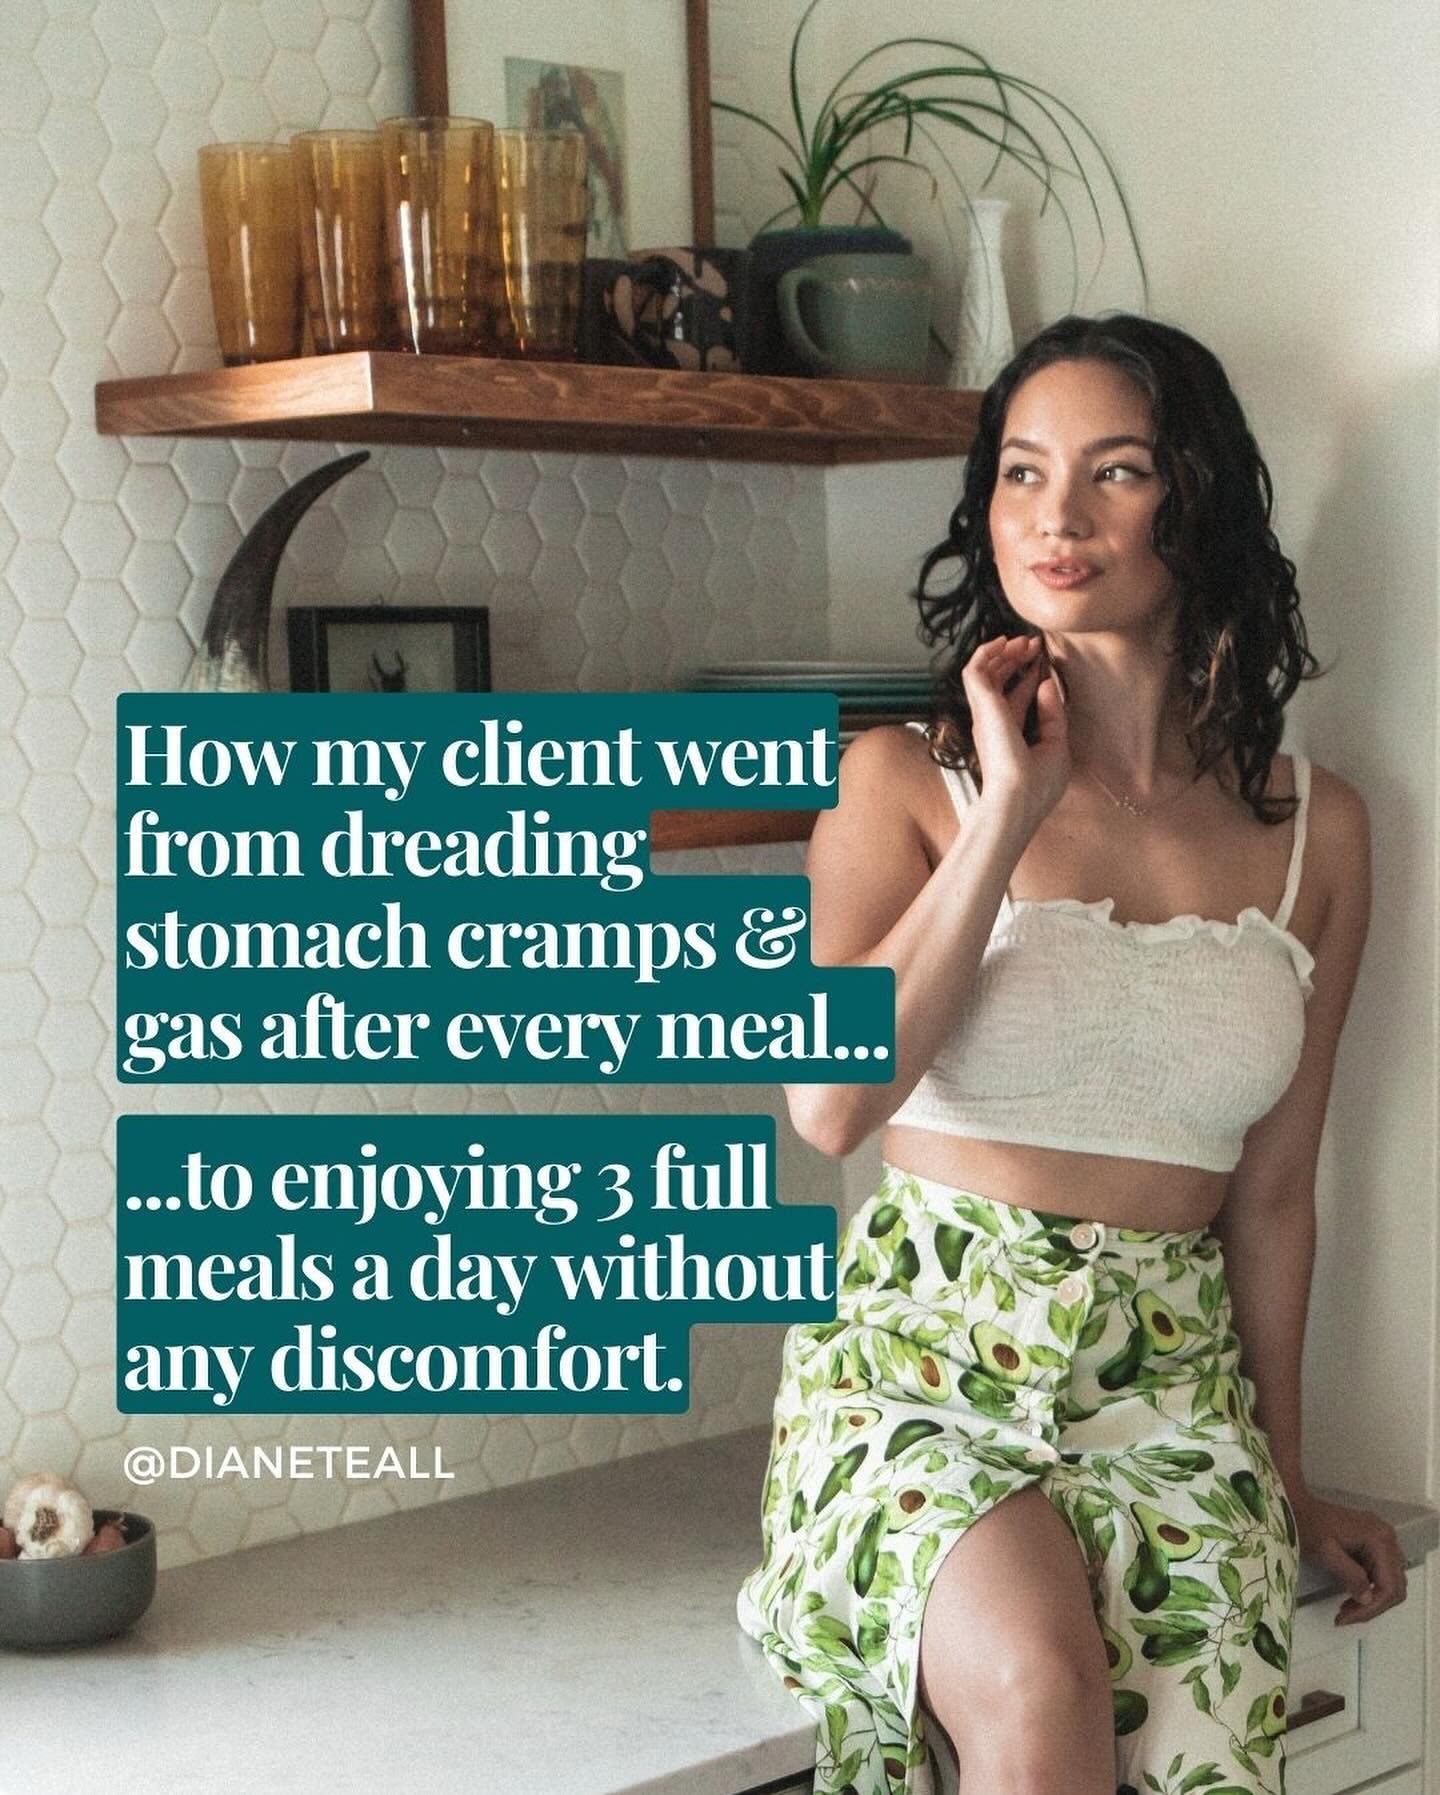 Started with anxiety over stomach cramps, now she&rsquo;s here &rarr; enjoying food again, clearer skin, and easier periods.

Plus, the tools and the confidence to continue her results after her program ended.

My client was no stranger to trying thi